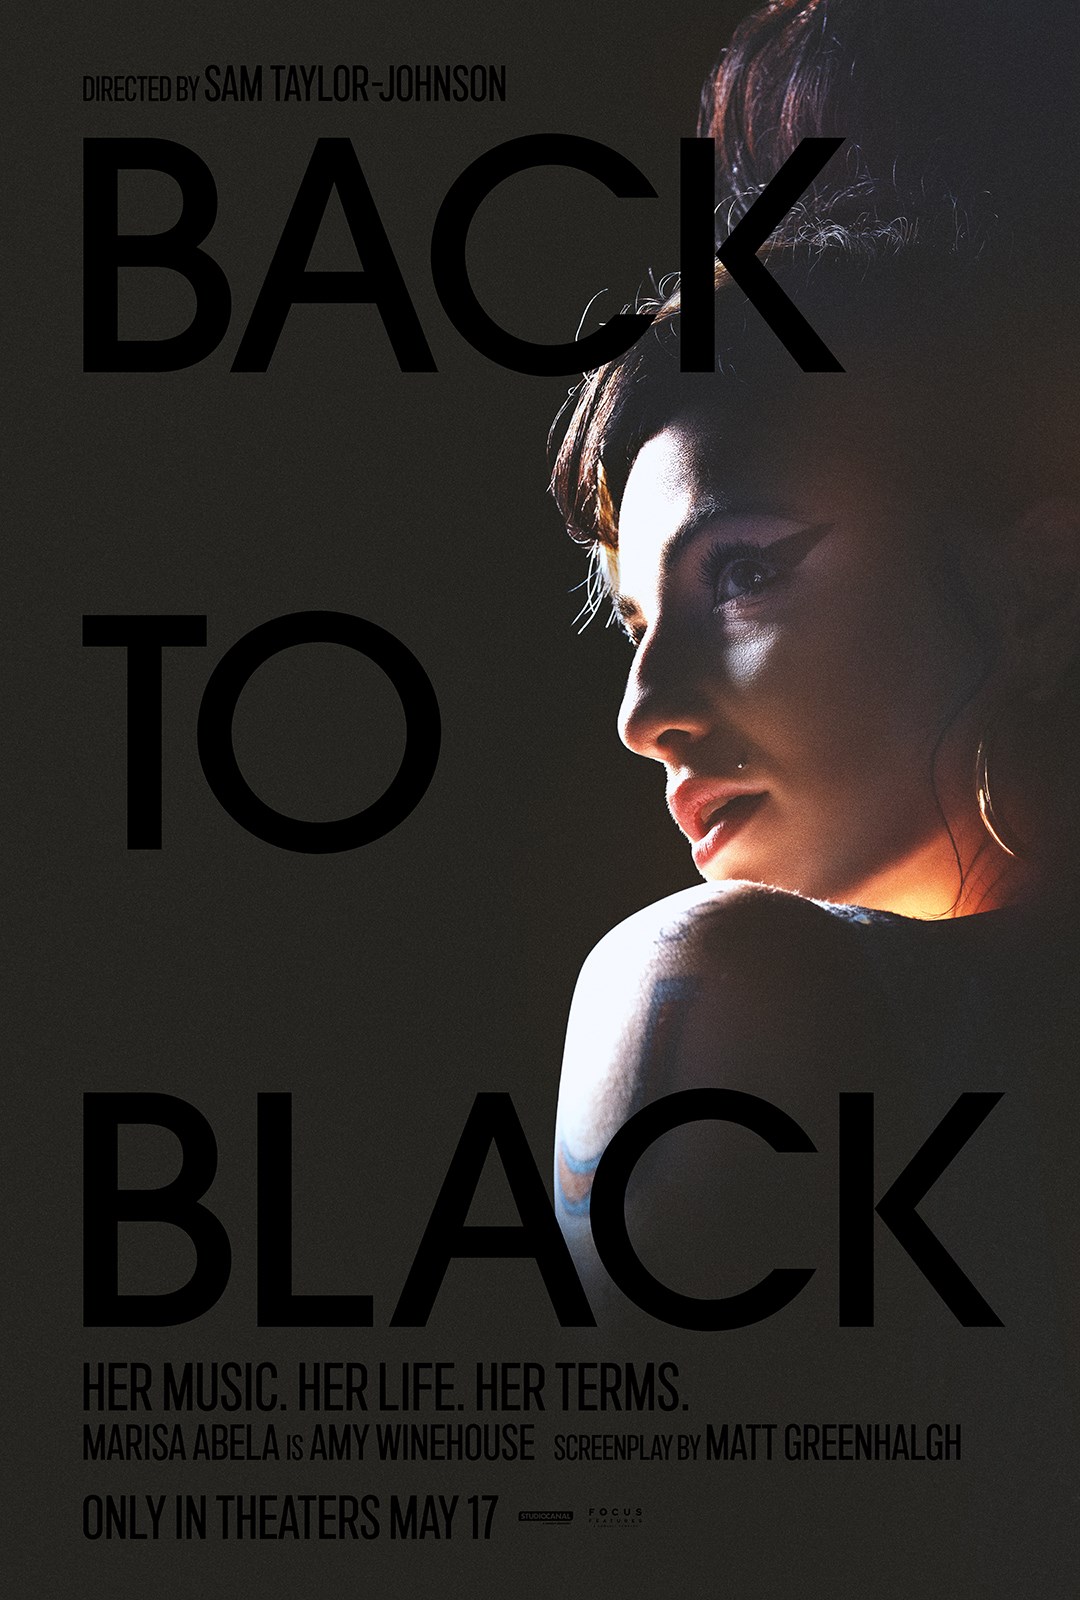 Back to Black Early Access Screening